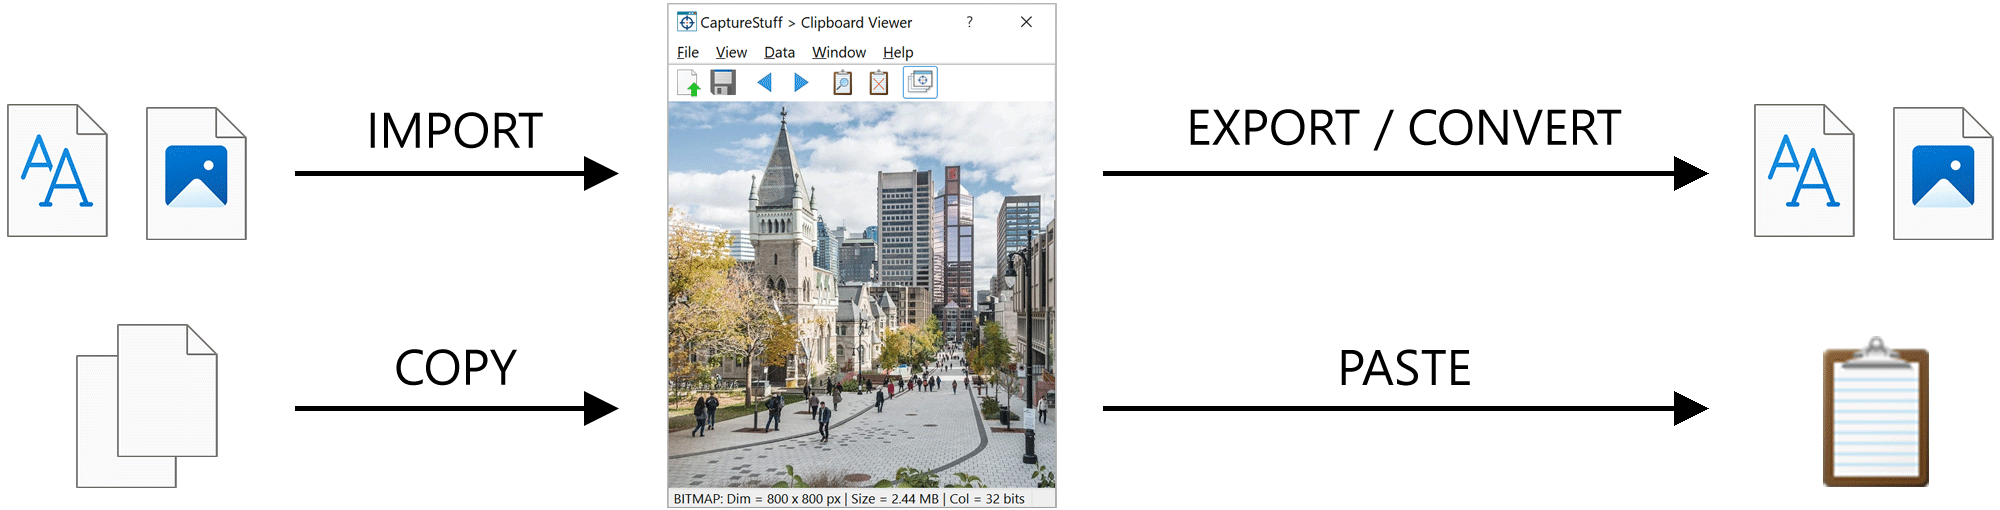 Open file in clipboard / Export clipboard to file